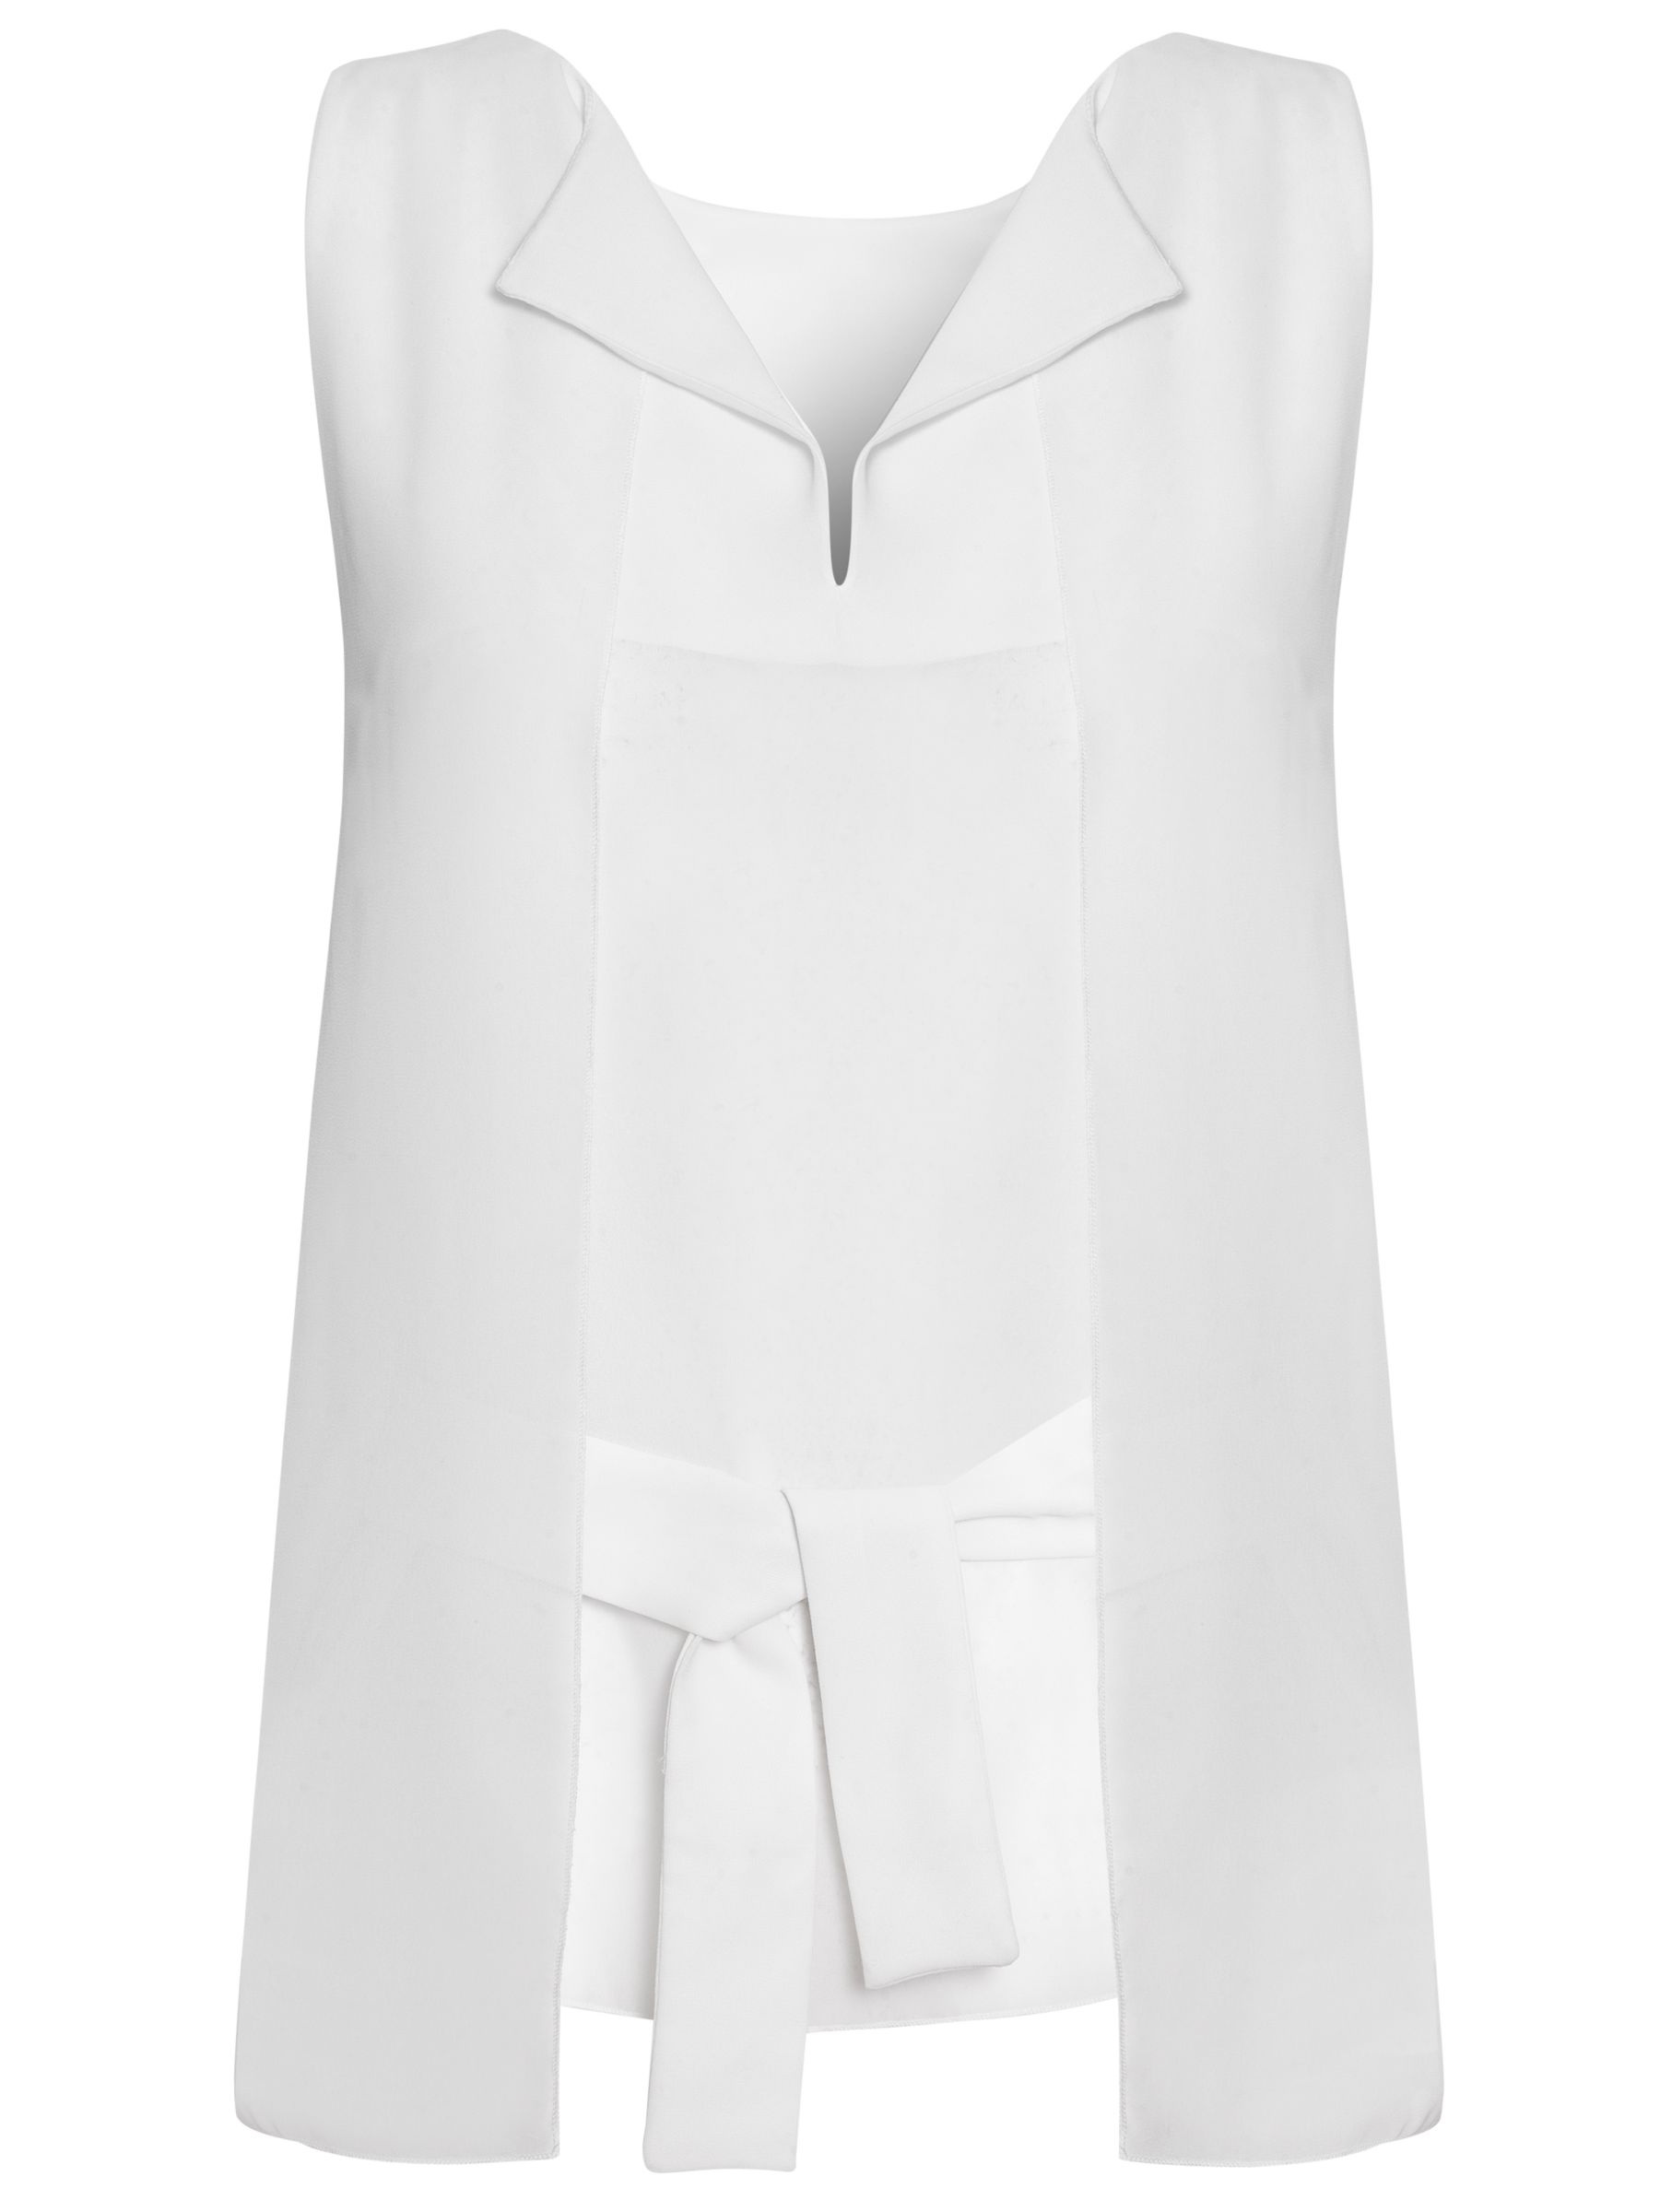 Jaeger Layered Tie Blouse, Ivory